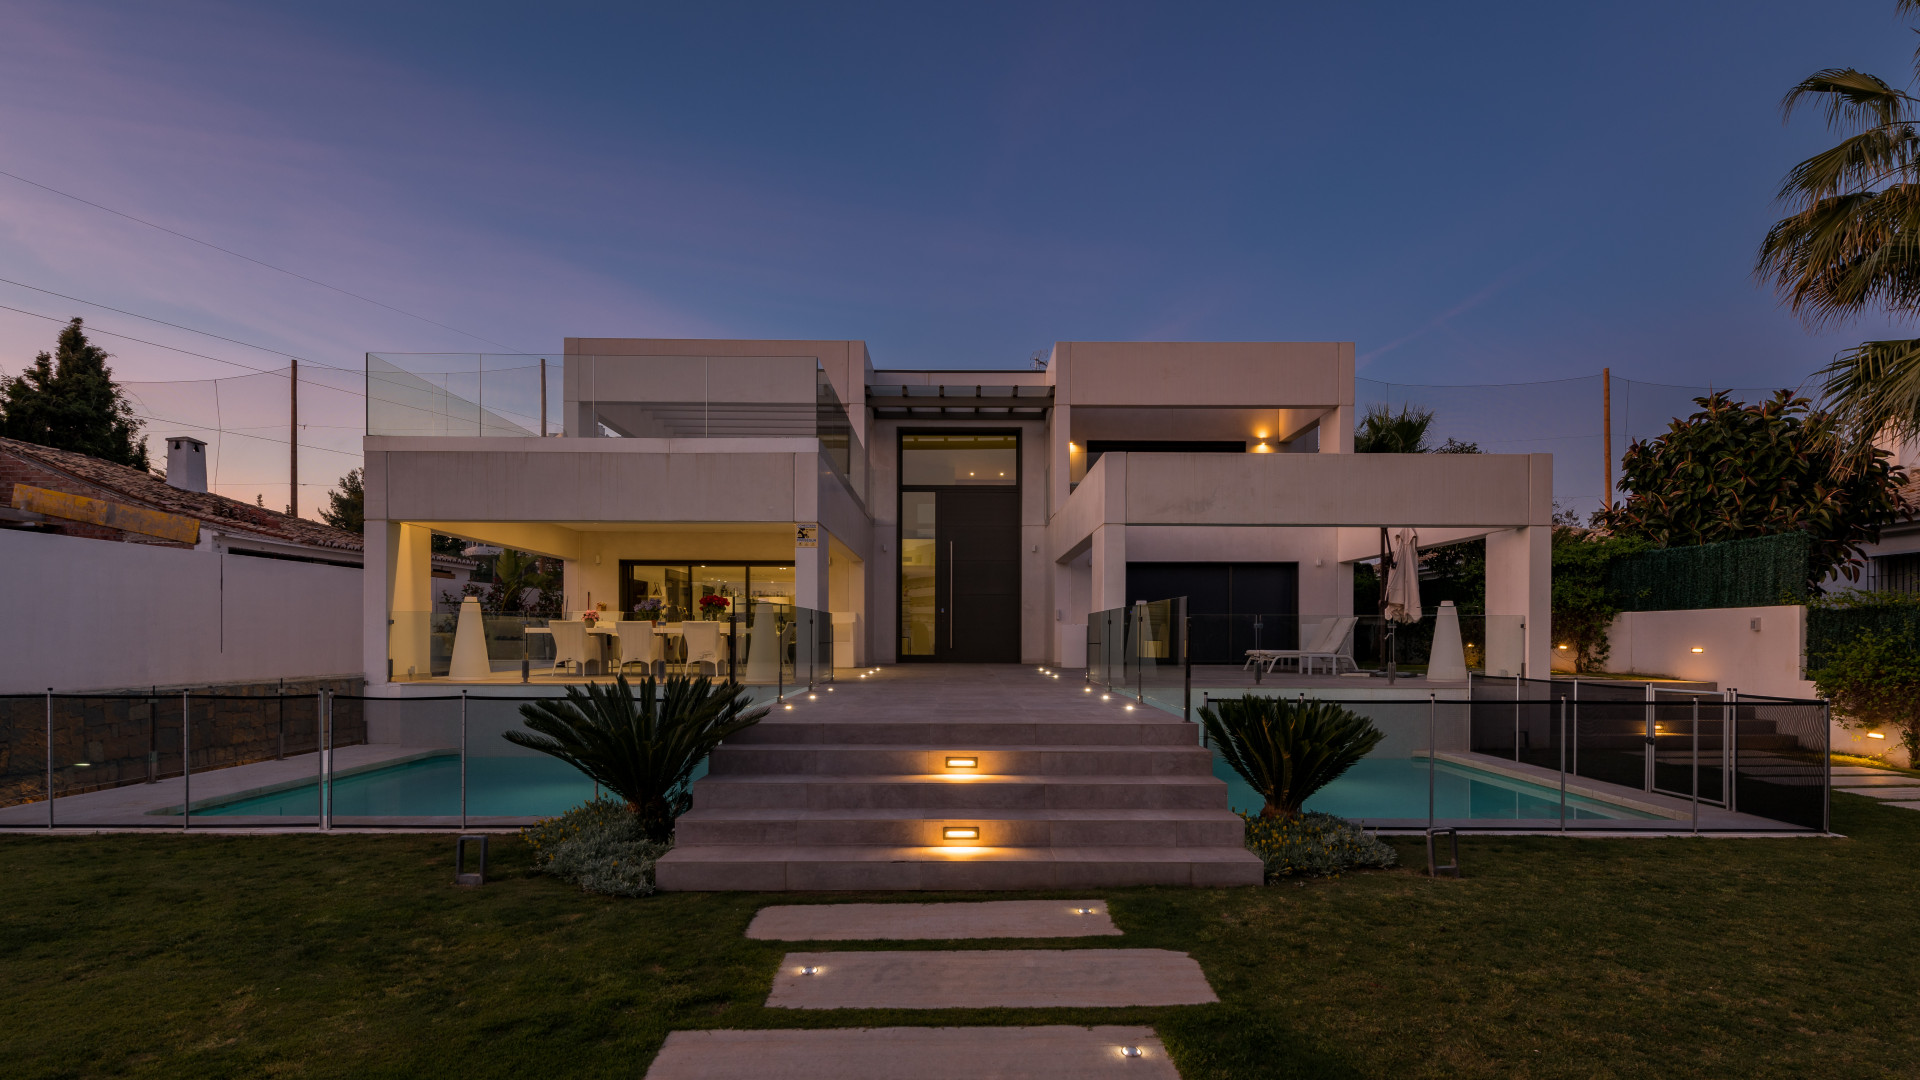 Front line golf, modern style villa recently completed located in a quiet area of Guadalmina Alta